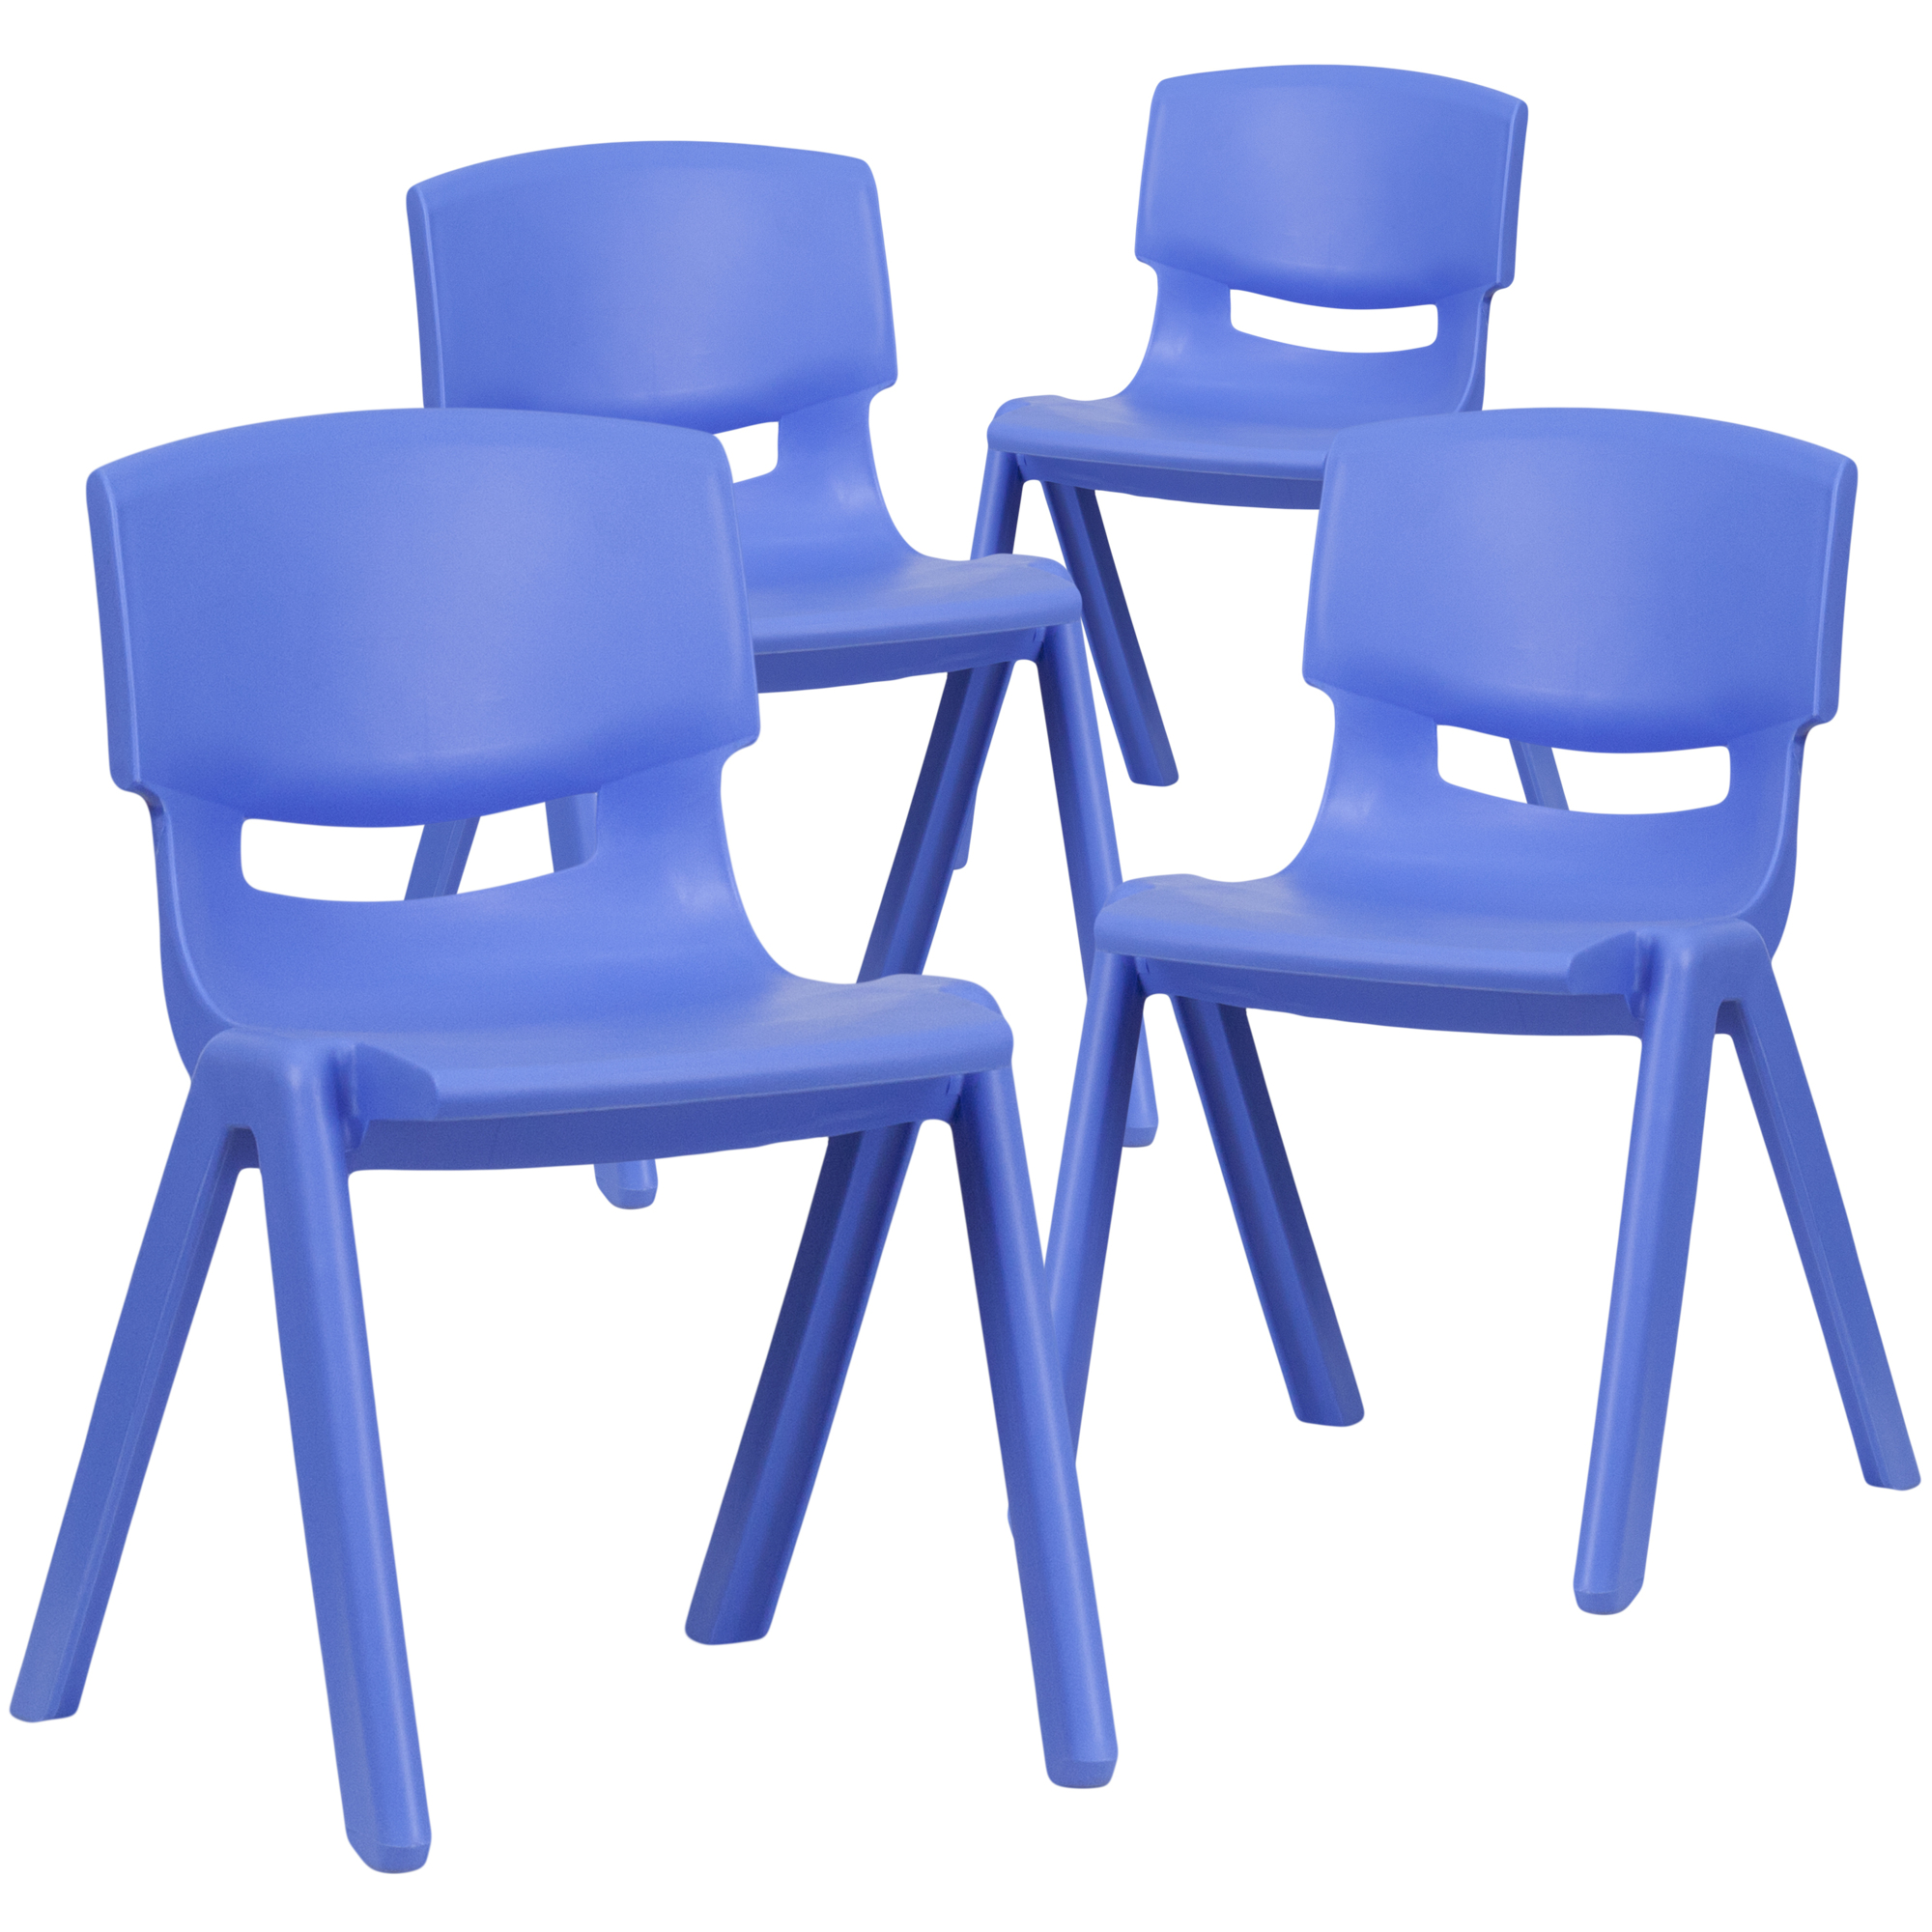 Flash Furniture, 4 Pk Blue Plastic Stack School Chair-13.25Inch H Seat, Primary Color Blue, Included (qty.) 4, Model 4YUYCX4004BLUE